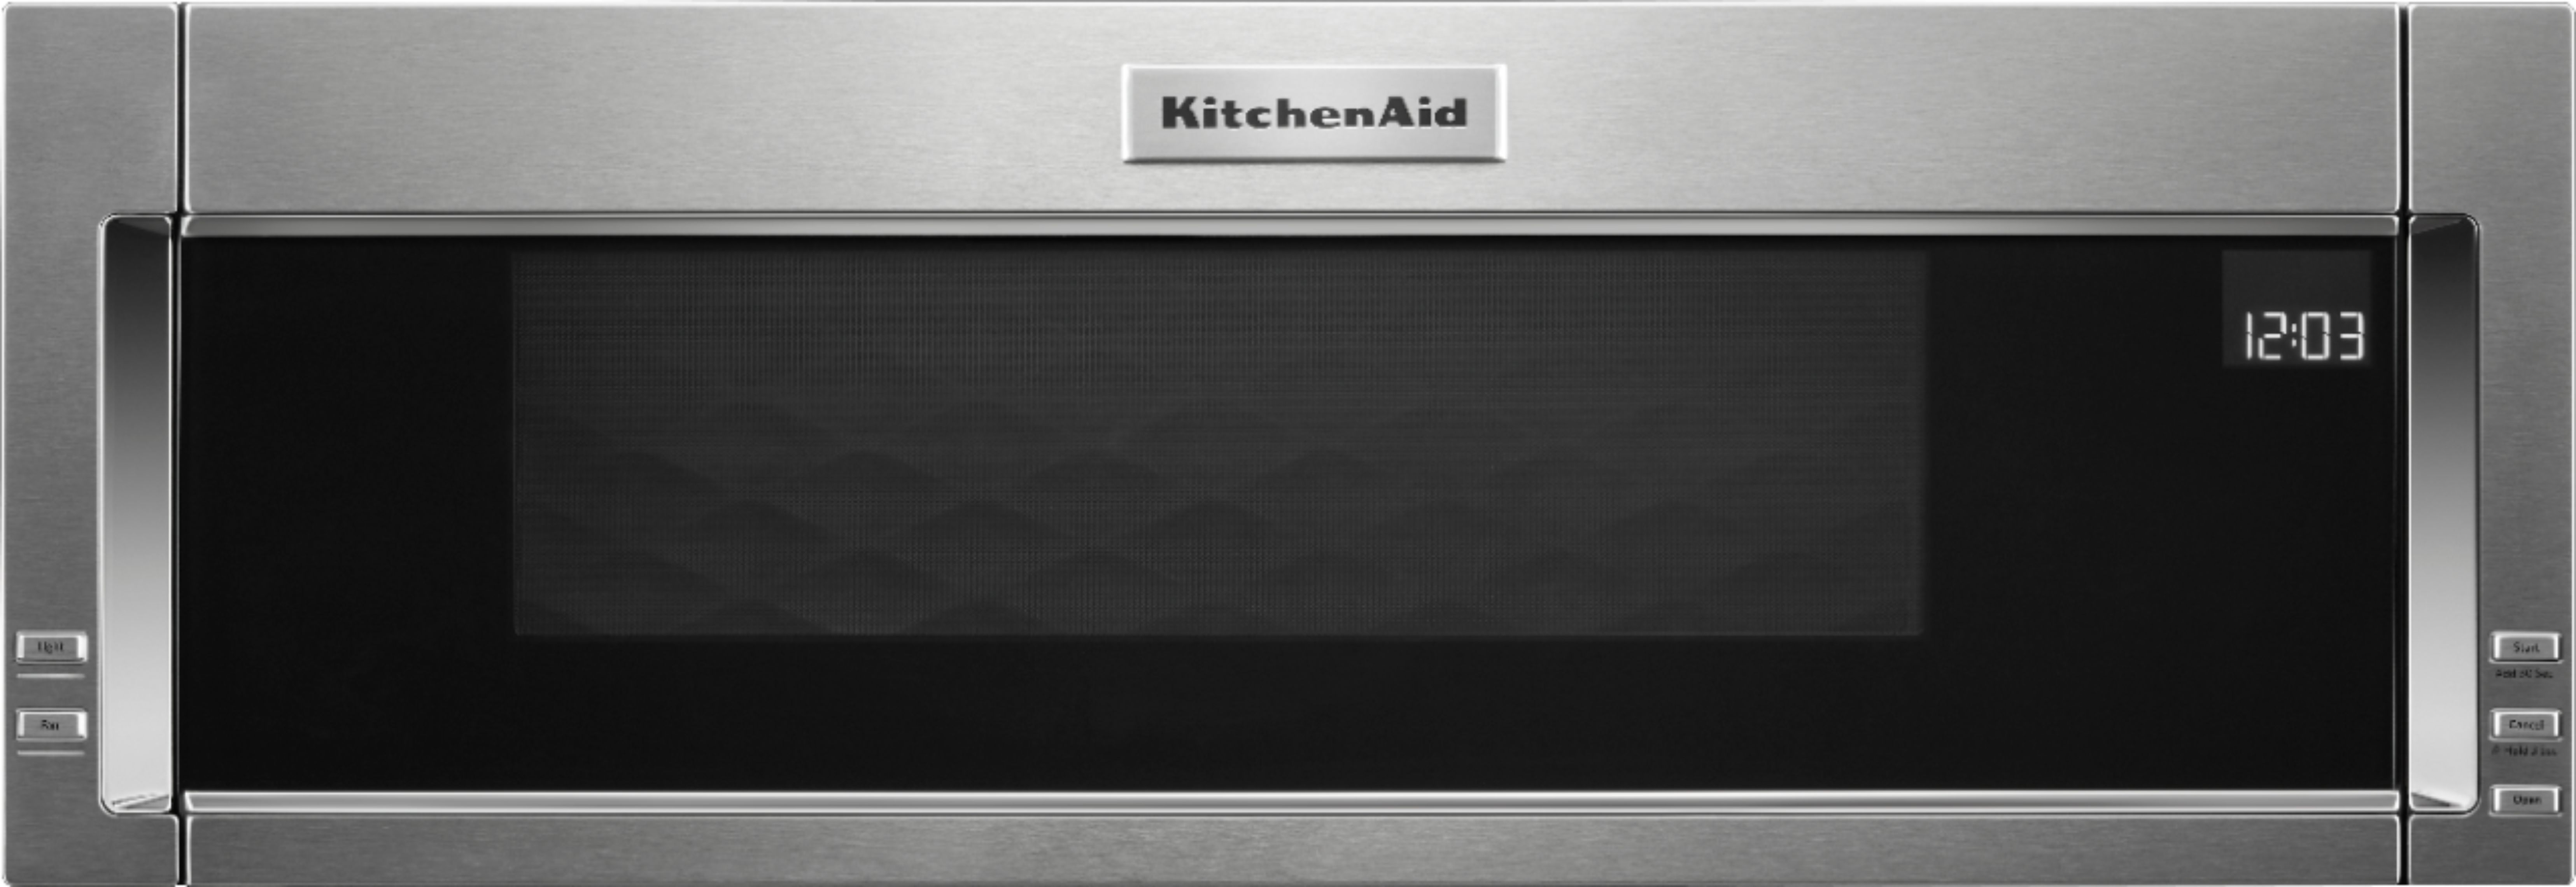 KitchenAid – 1.1 Cu. Ft. Over-the-Range Microwave with Sensor Cooking – Stainless steel